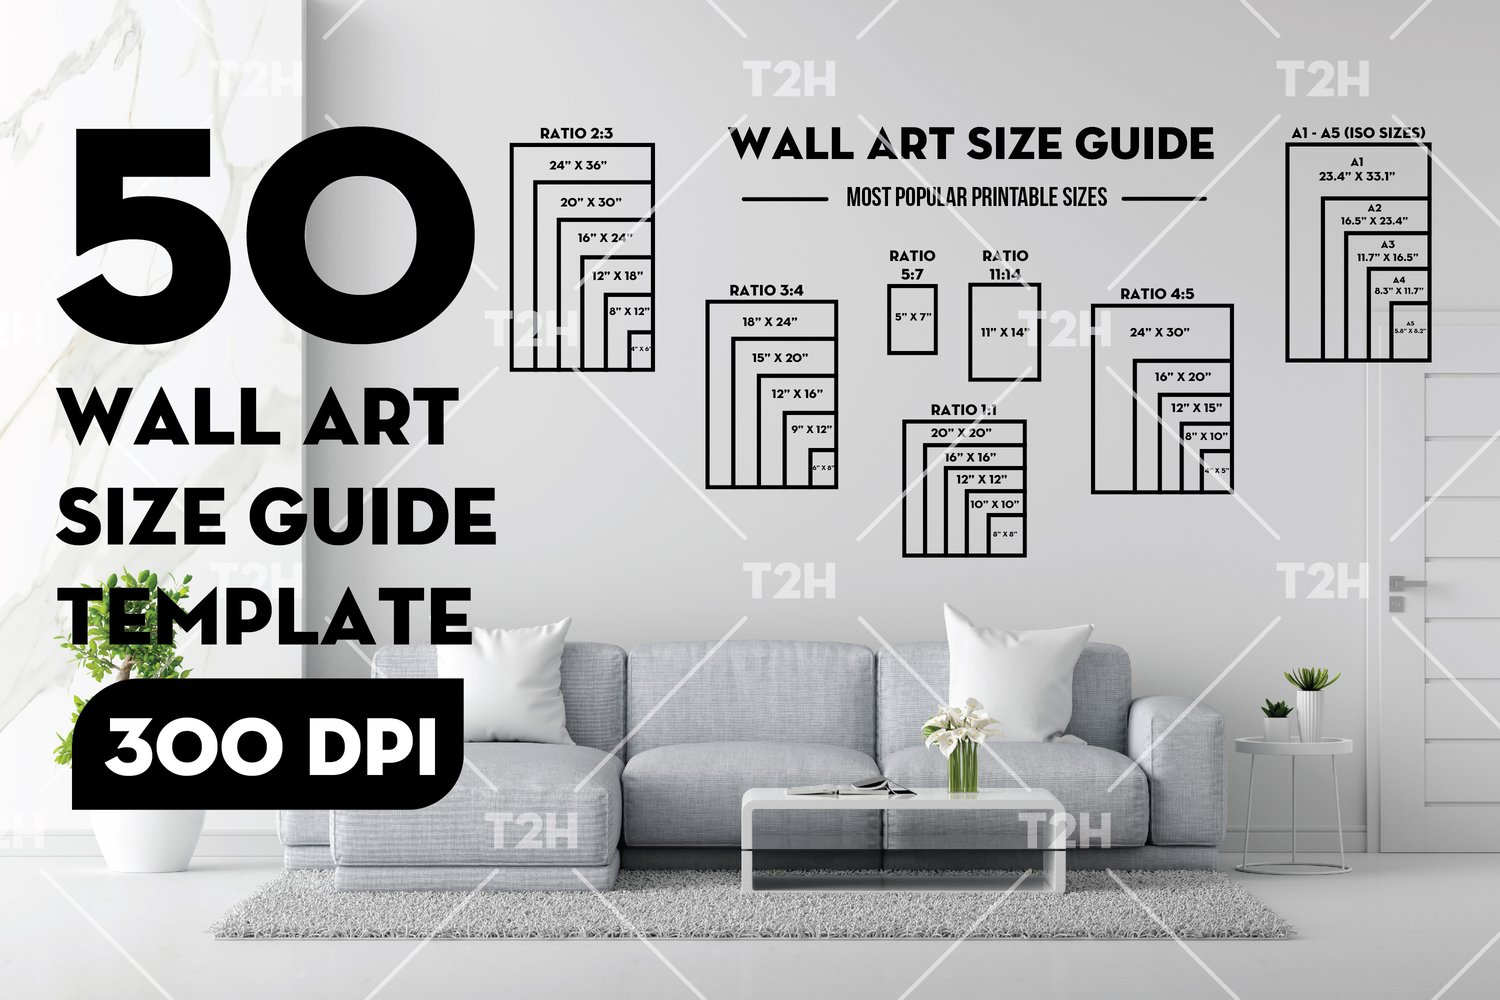 Wall art size guide bundle - Standard print size guide - Most popular printable sizes